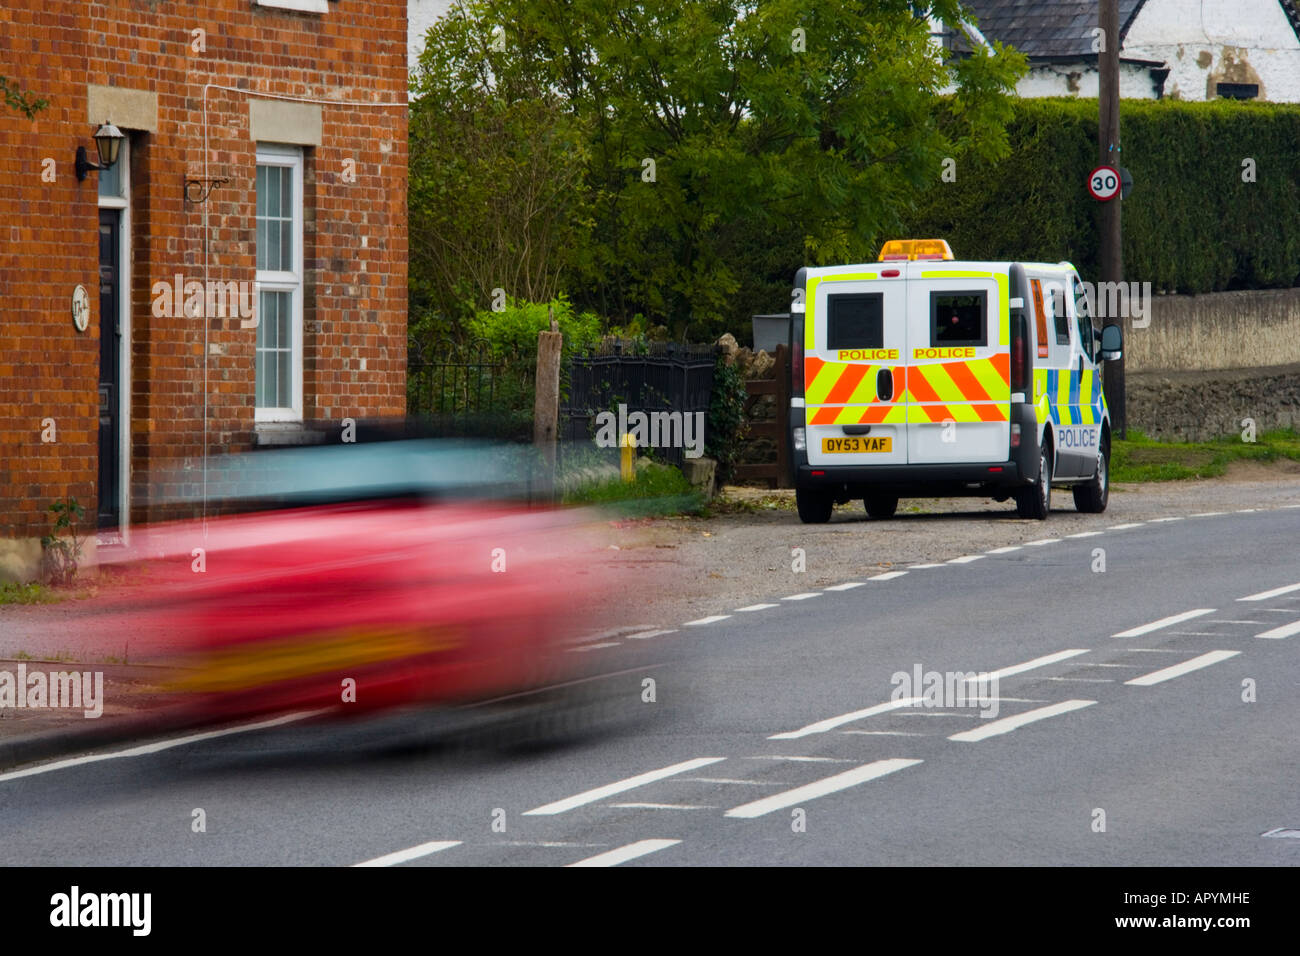 Red saloon car speeding past 30 mph police mobile speed trap traffic safety JMH1770 Stock Photo